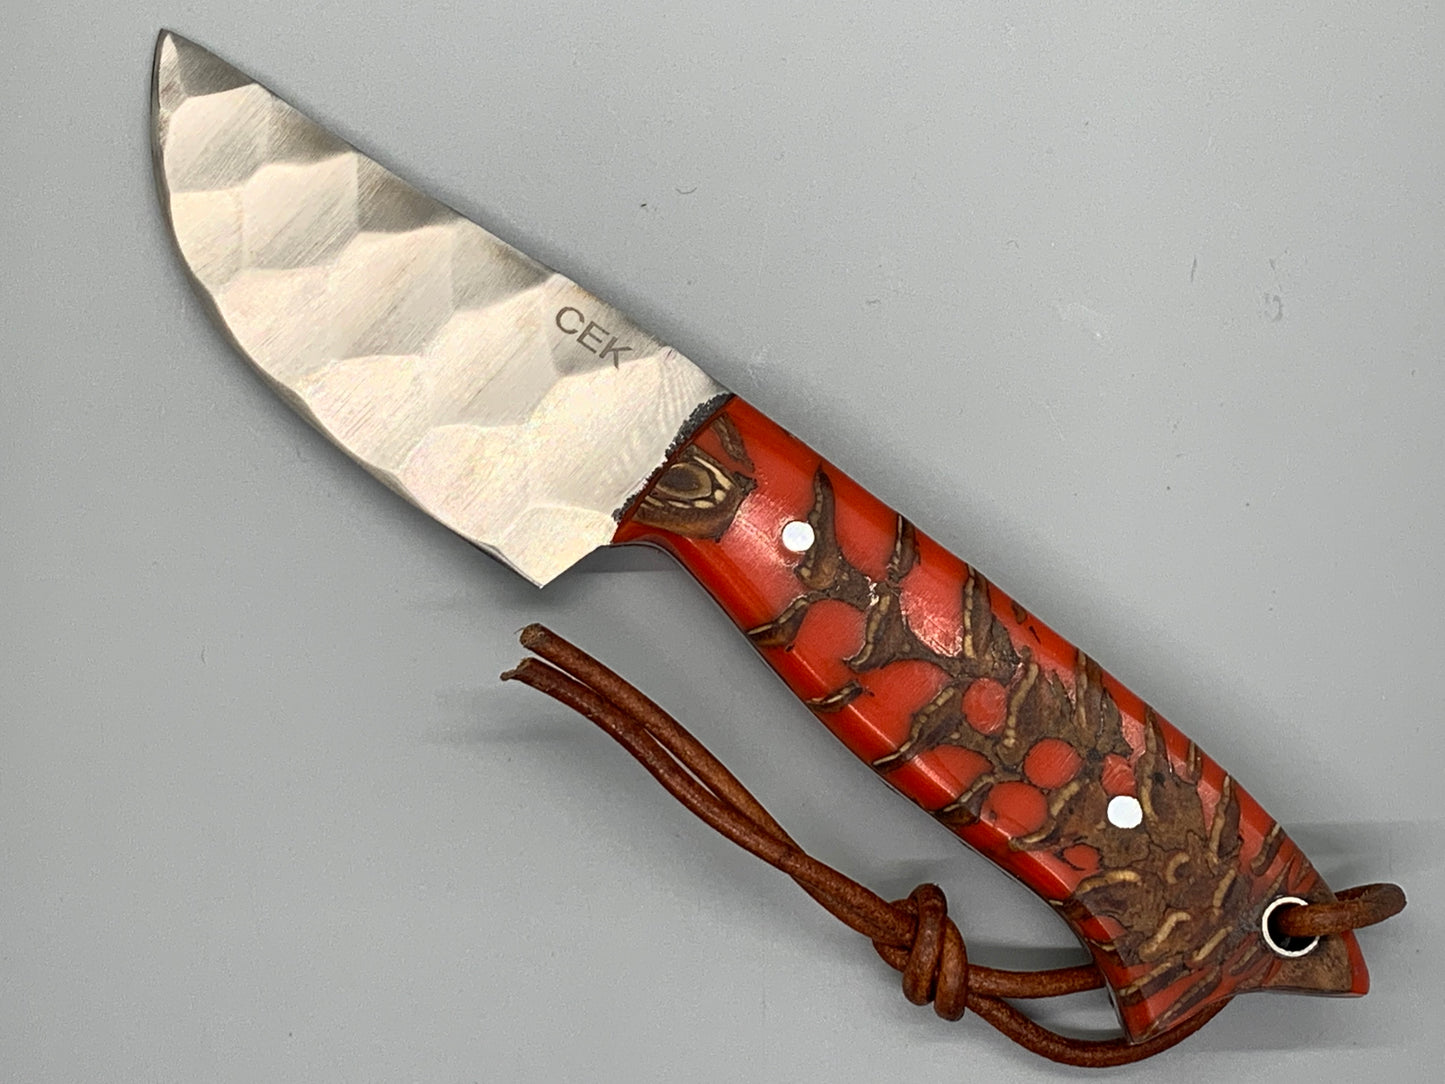 FX-062 Pine Cone Handle w/ Fixed D2 Steel blade